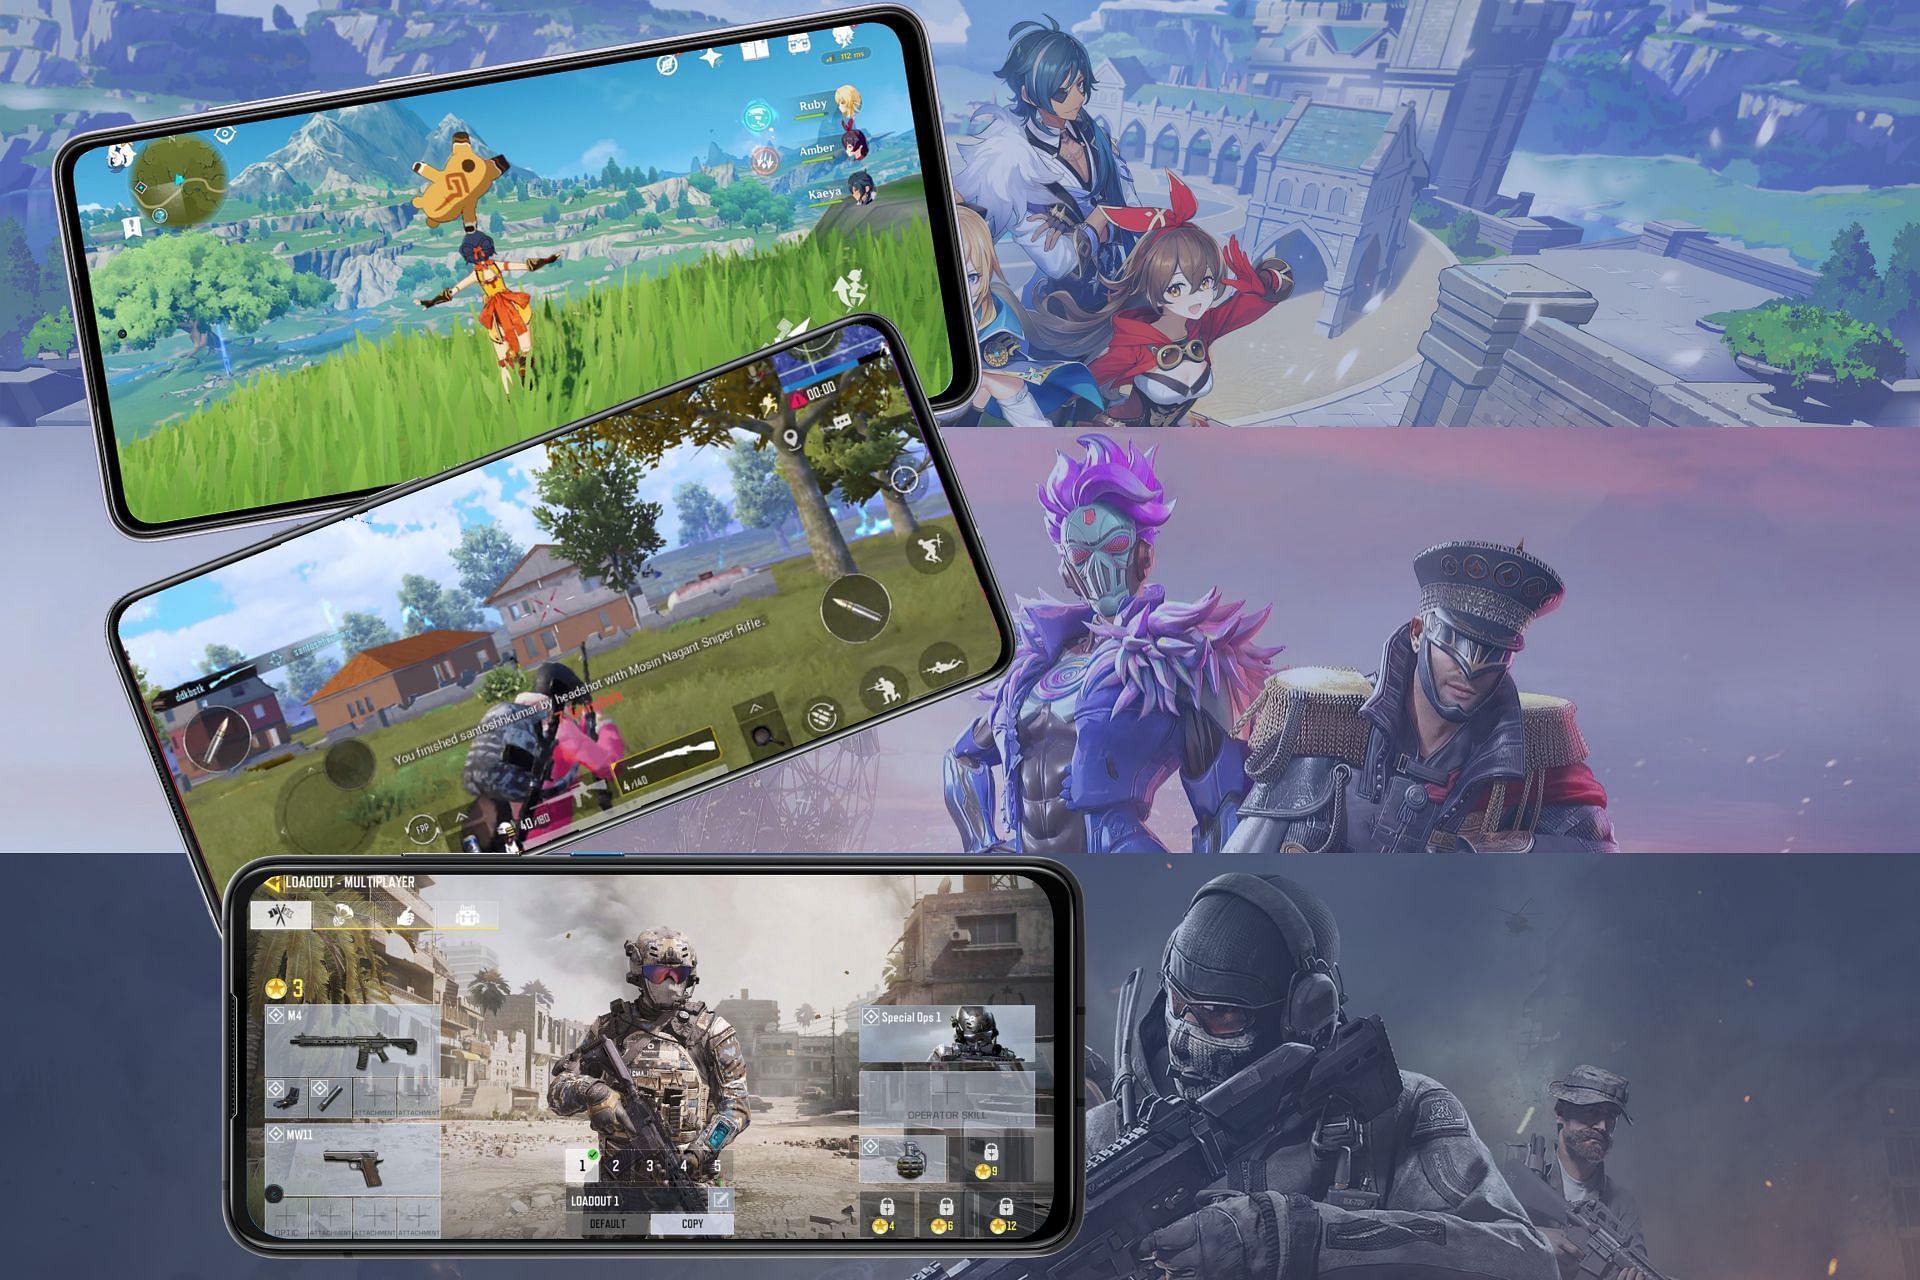 Top 10 Best FREE Mobile Games To Play in February 2022